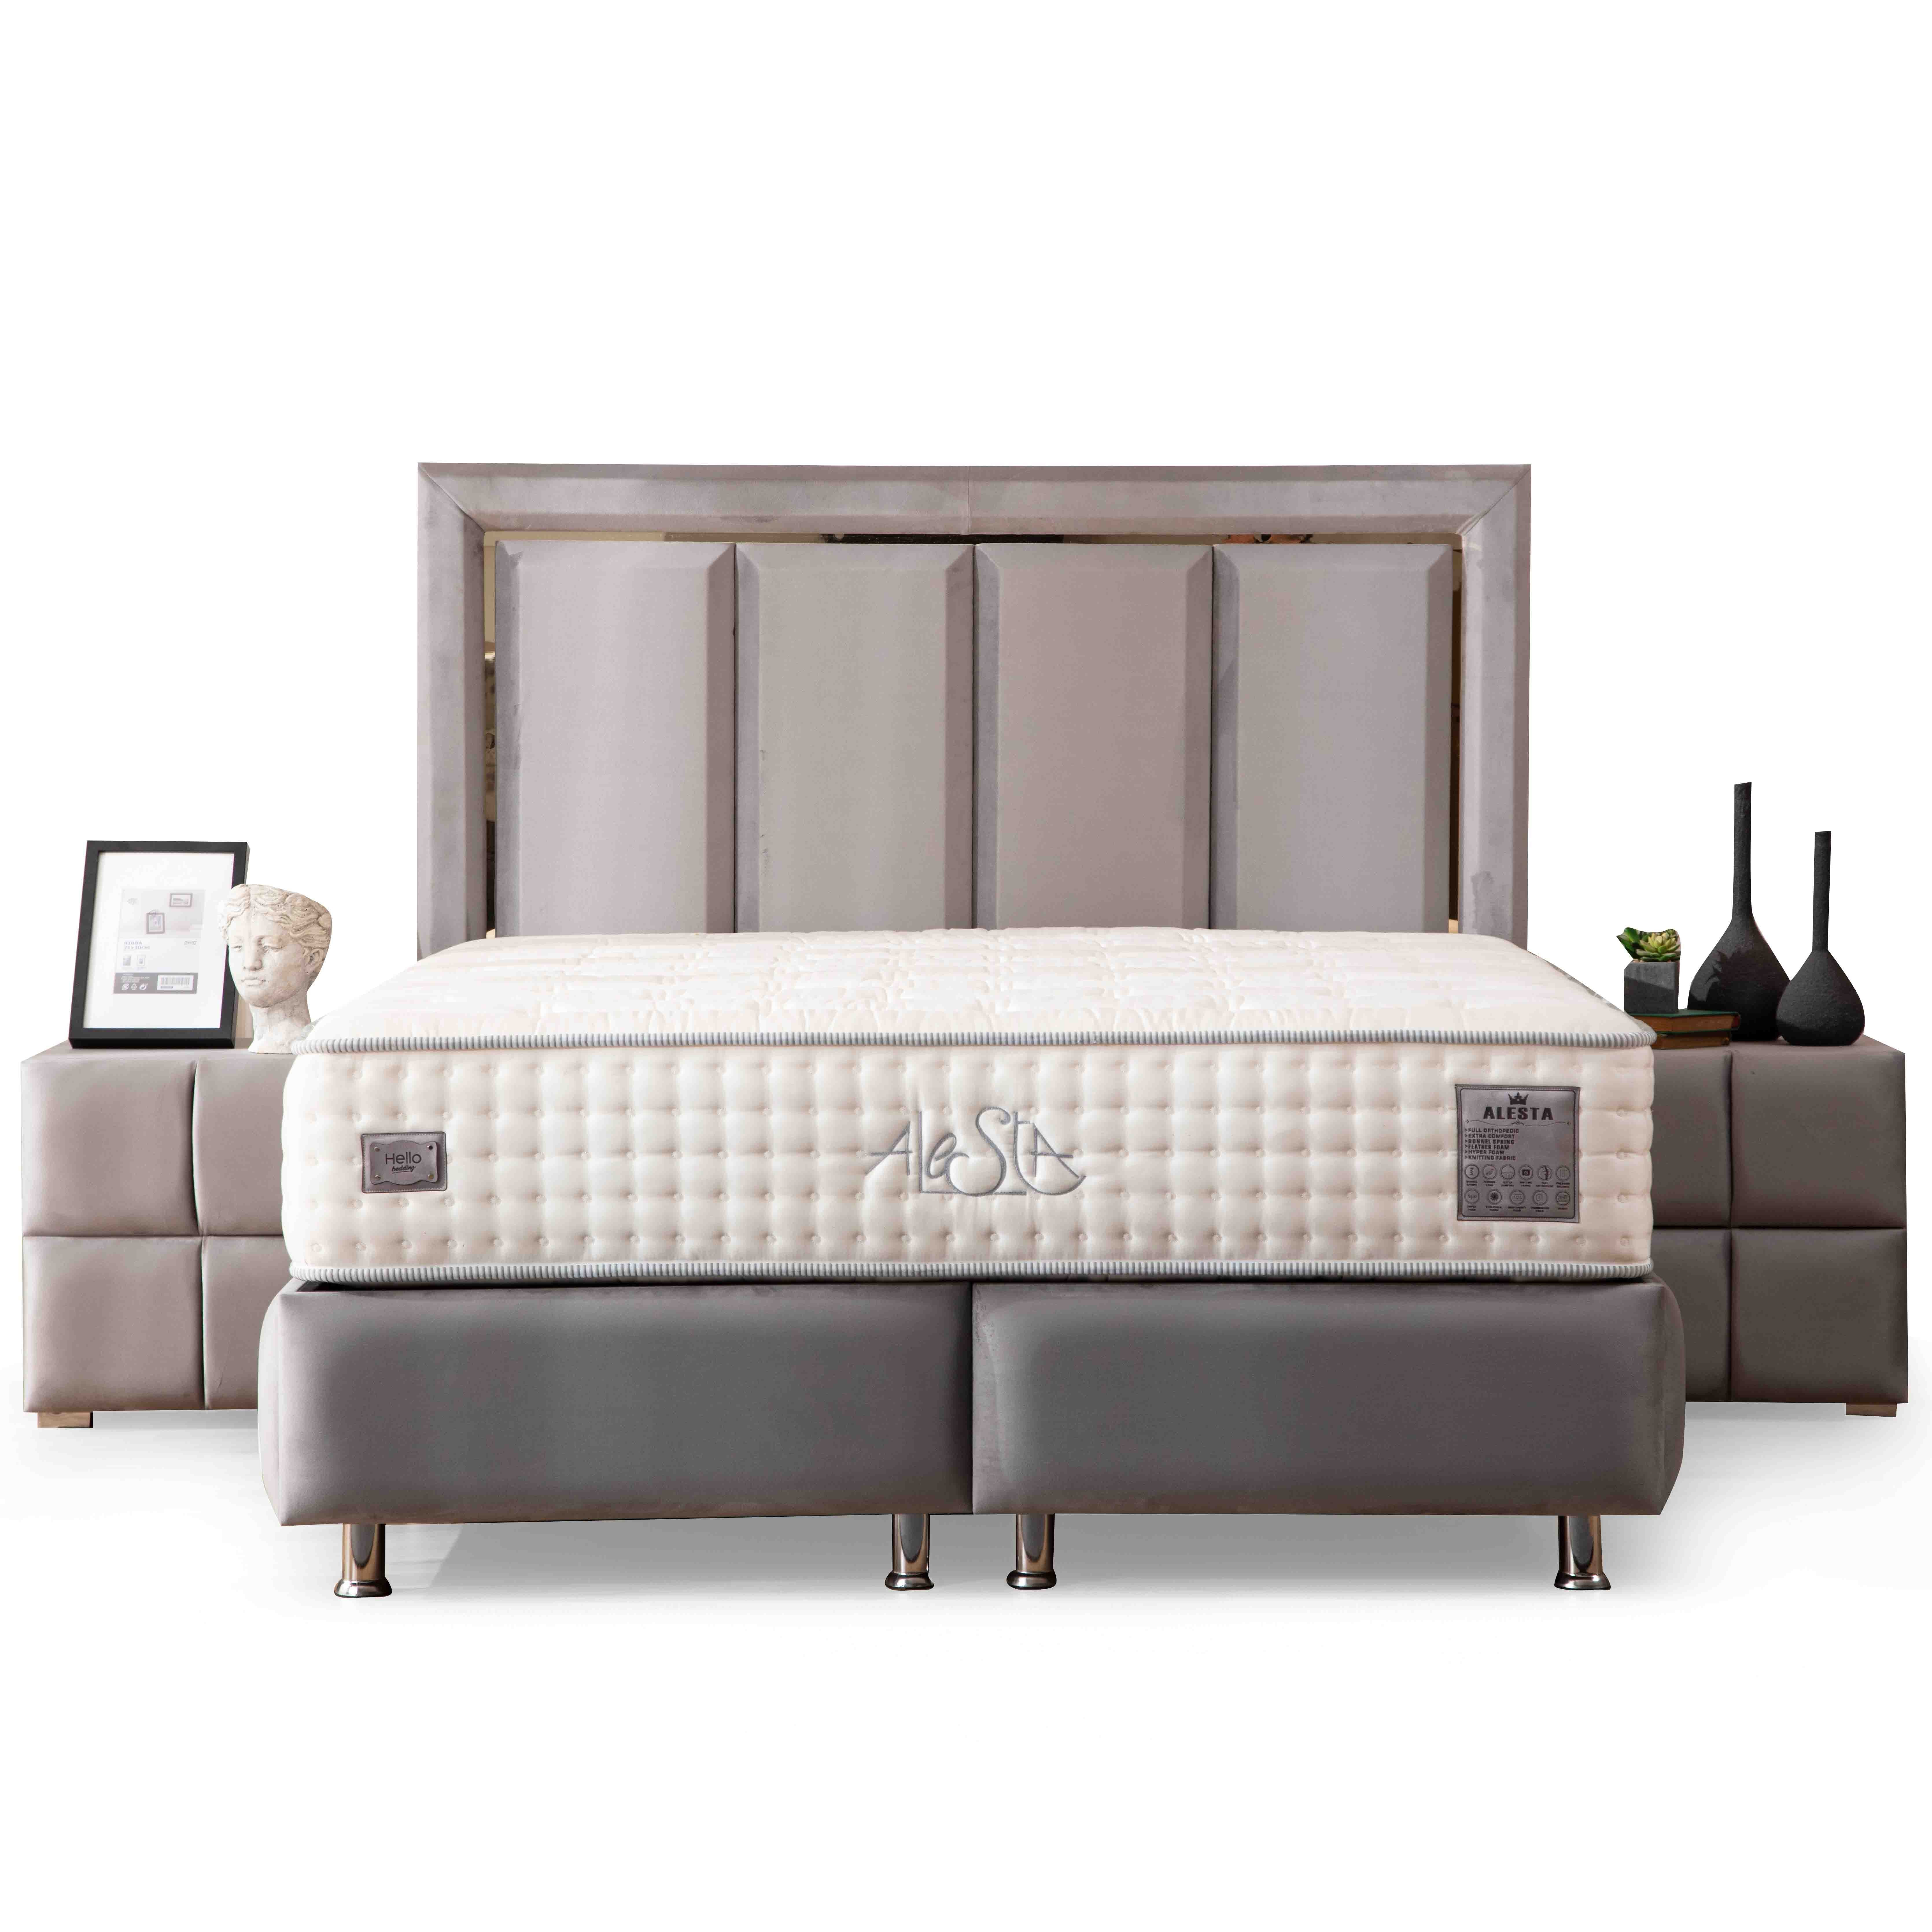 Bergama Bed With Storage 120*200